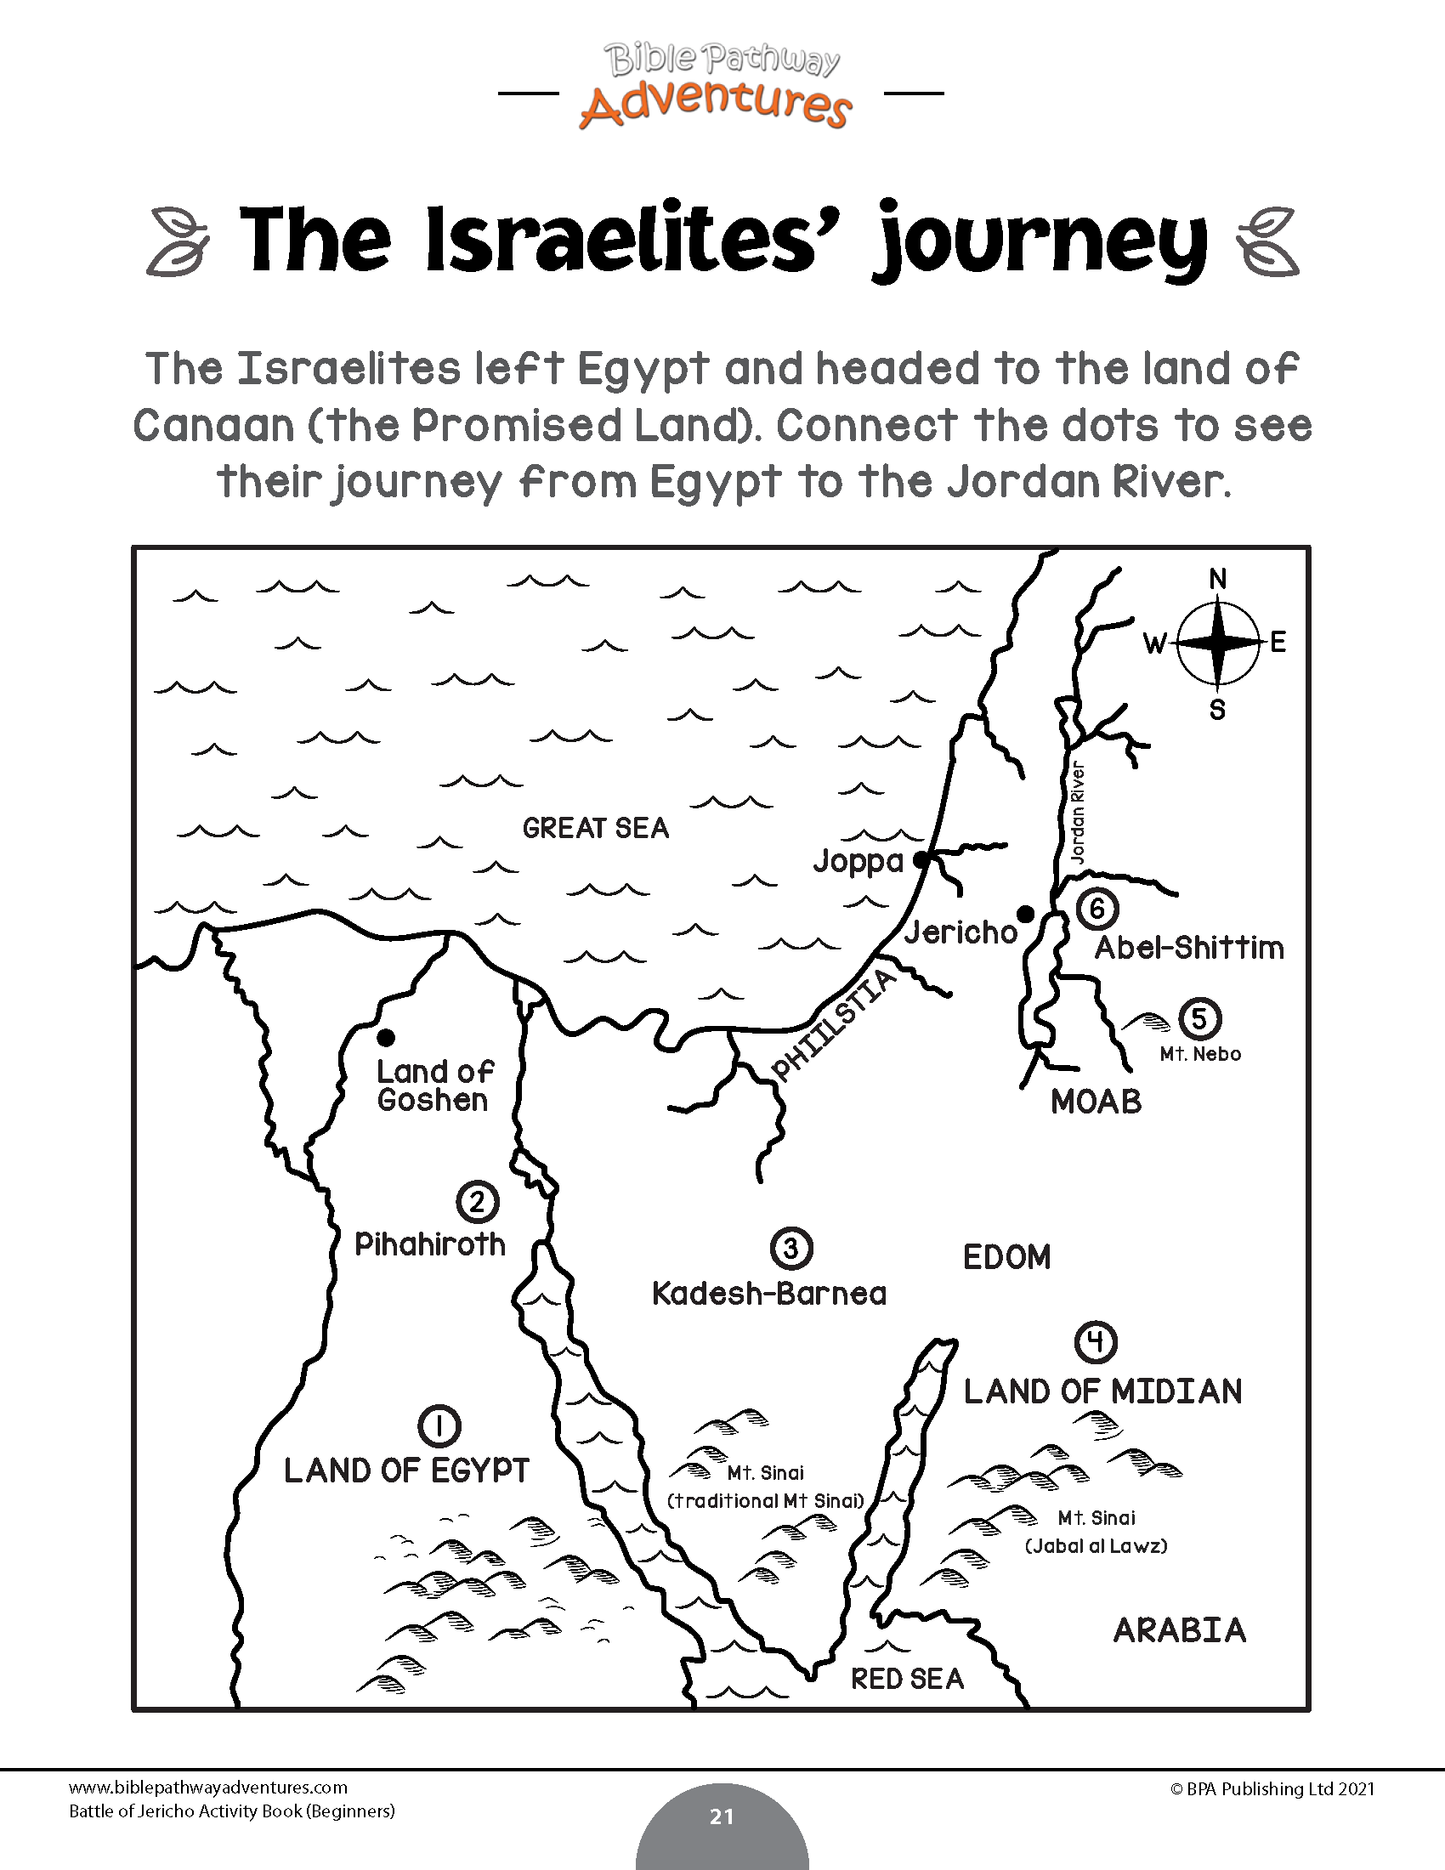 Battle of Jericho Activity Book for Beginners (PDF)